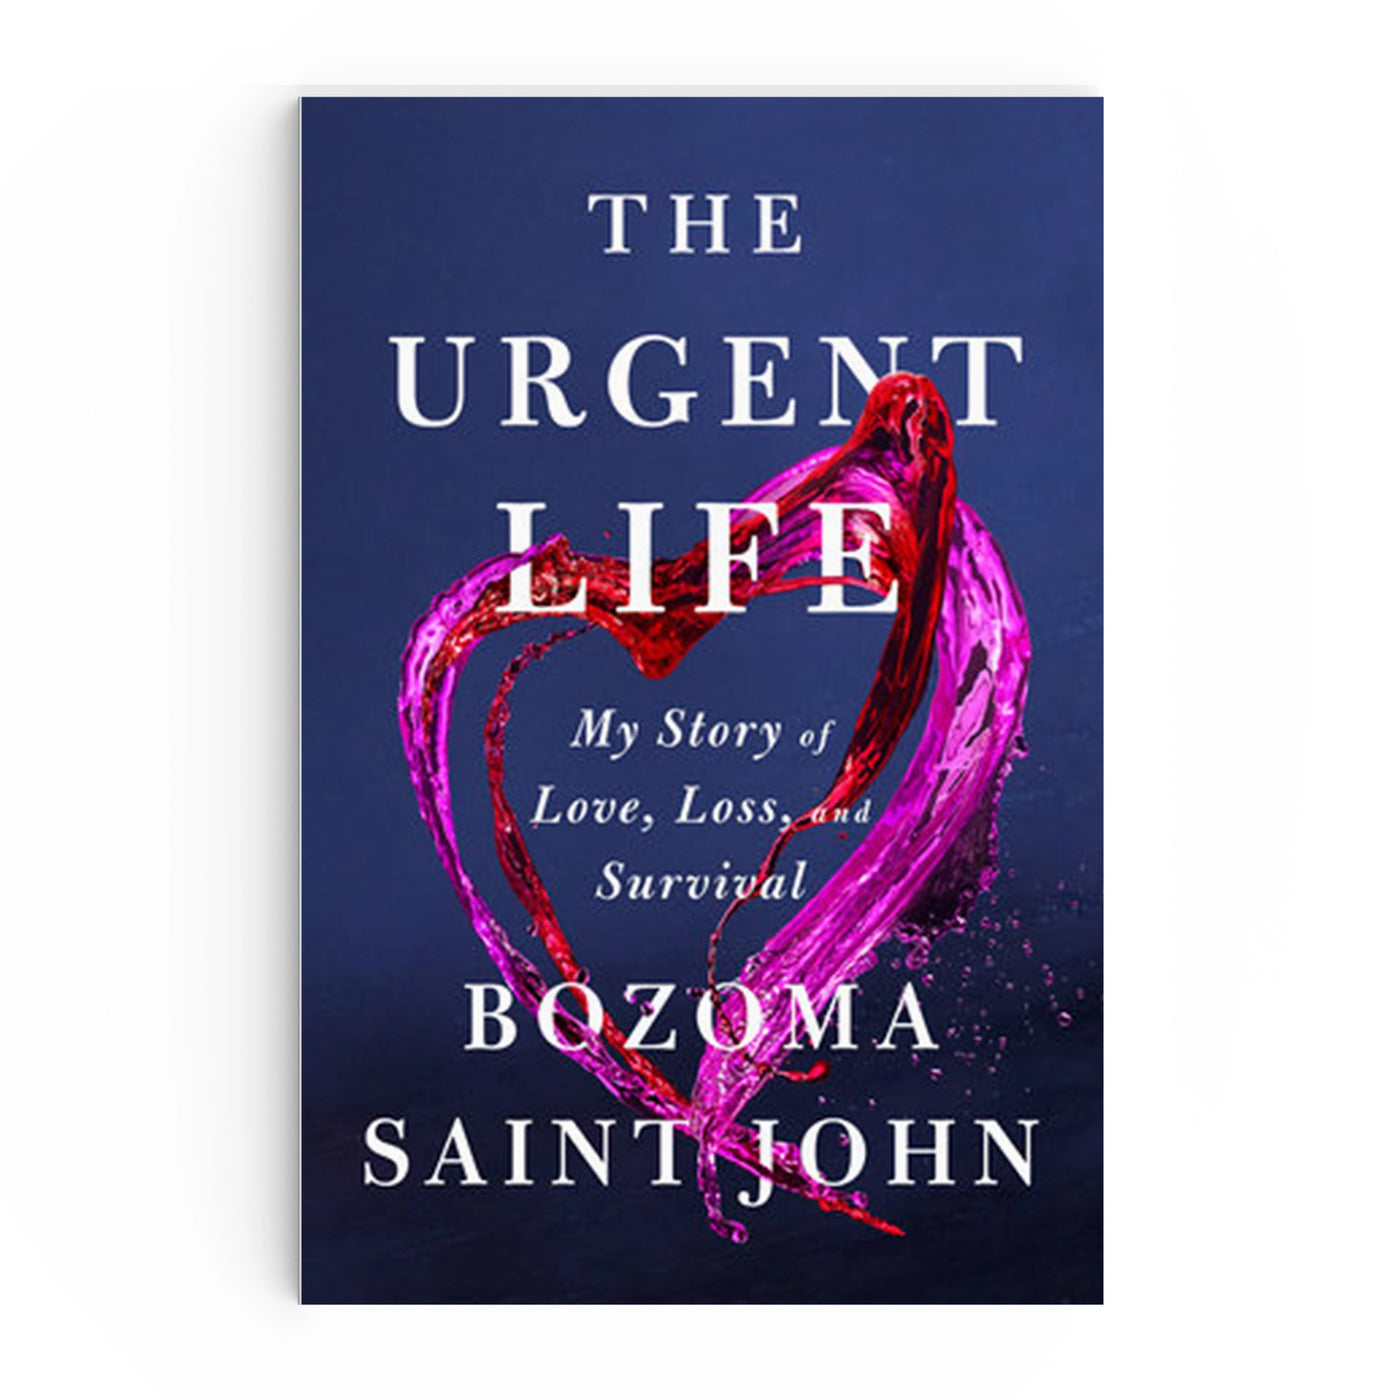 The Urgent Life: My Story of Love, Loss, and Survival by Bozoma Saint John